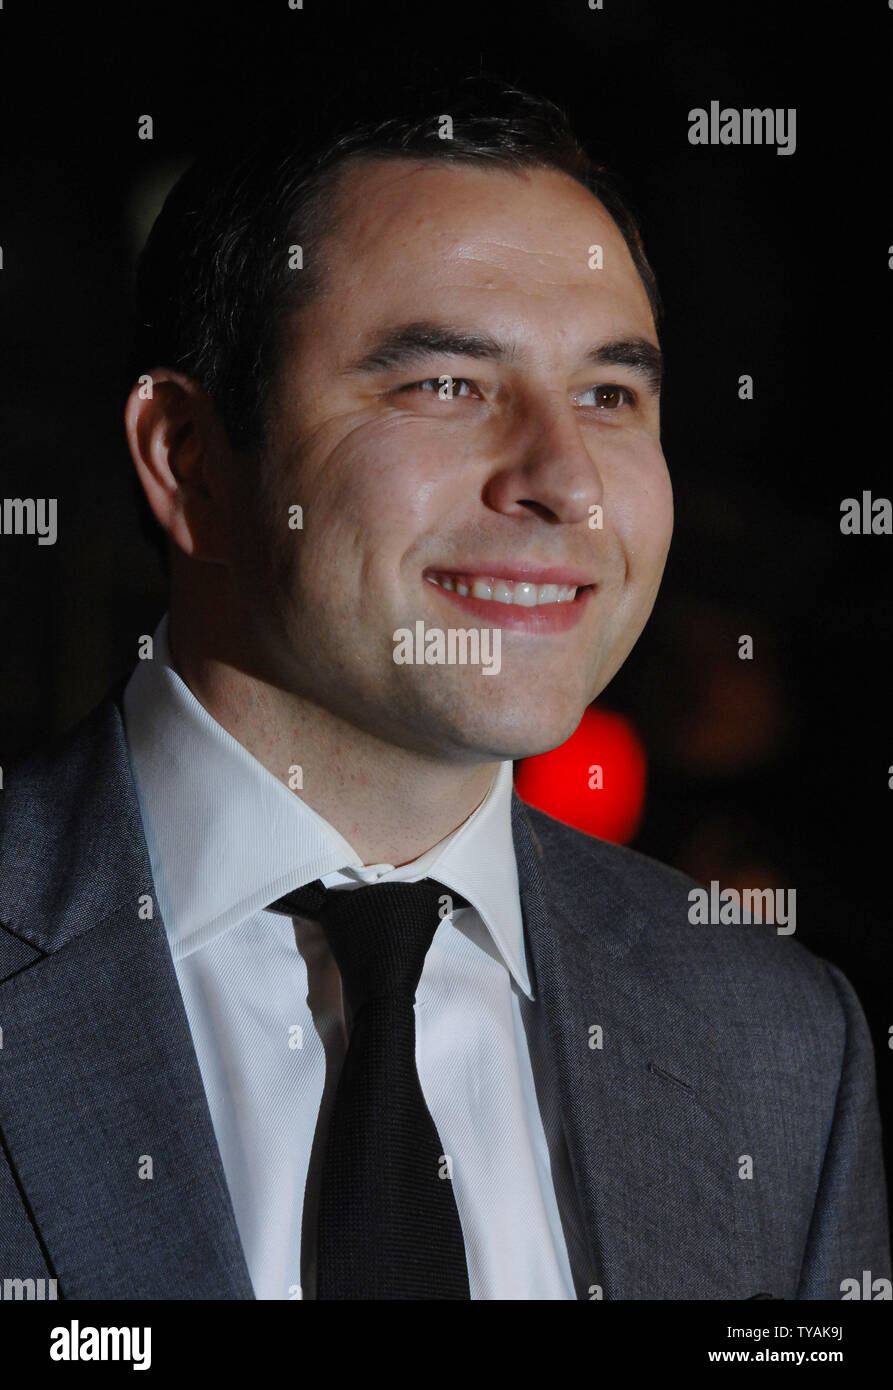 British comedian/actor David Walliams attends the premiere of "Stardust" at Odeon, Leicester Square in London on October 3, 2007.  (UPI Photo/Rune Hellestad) Stock Photo